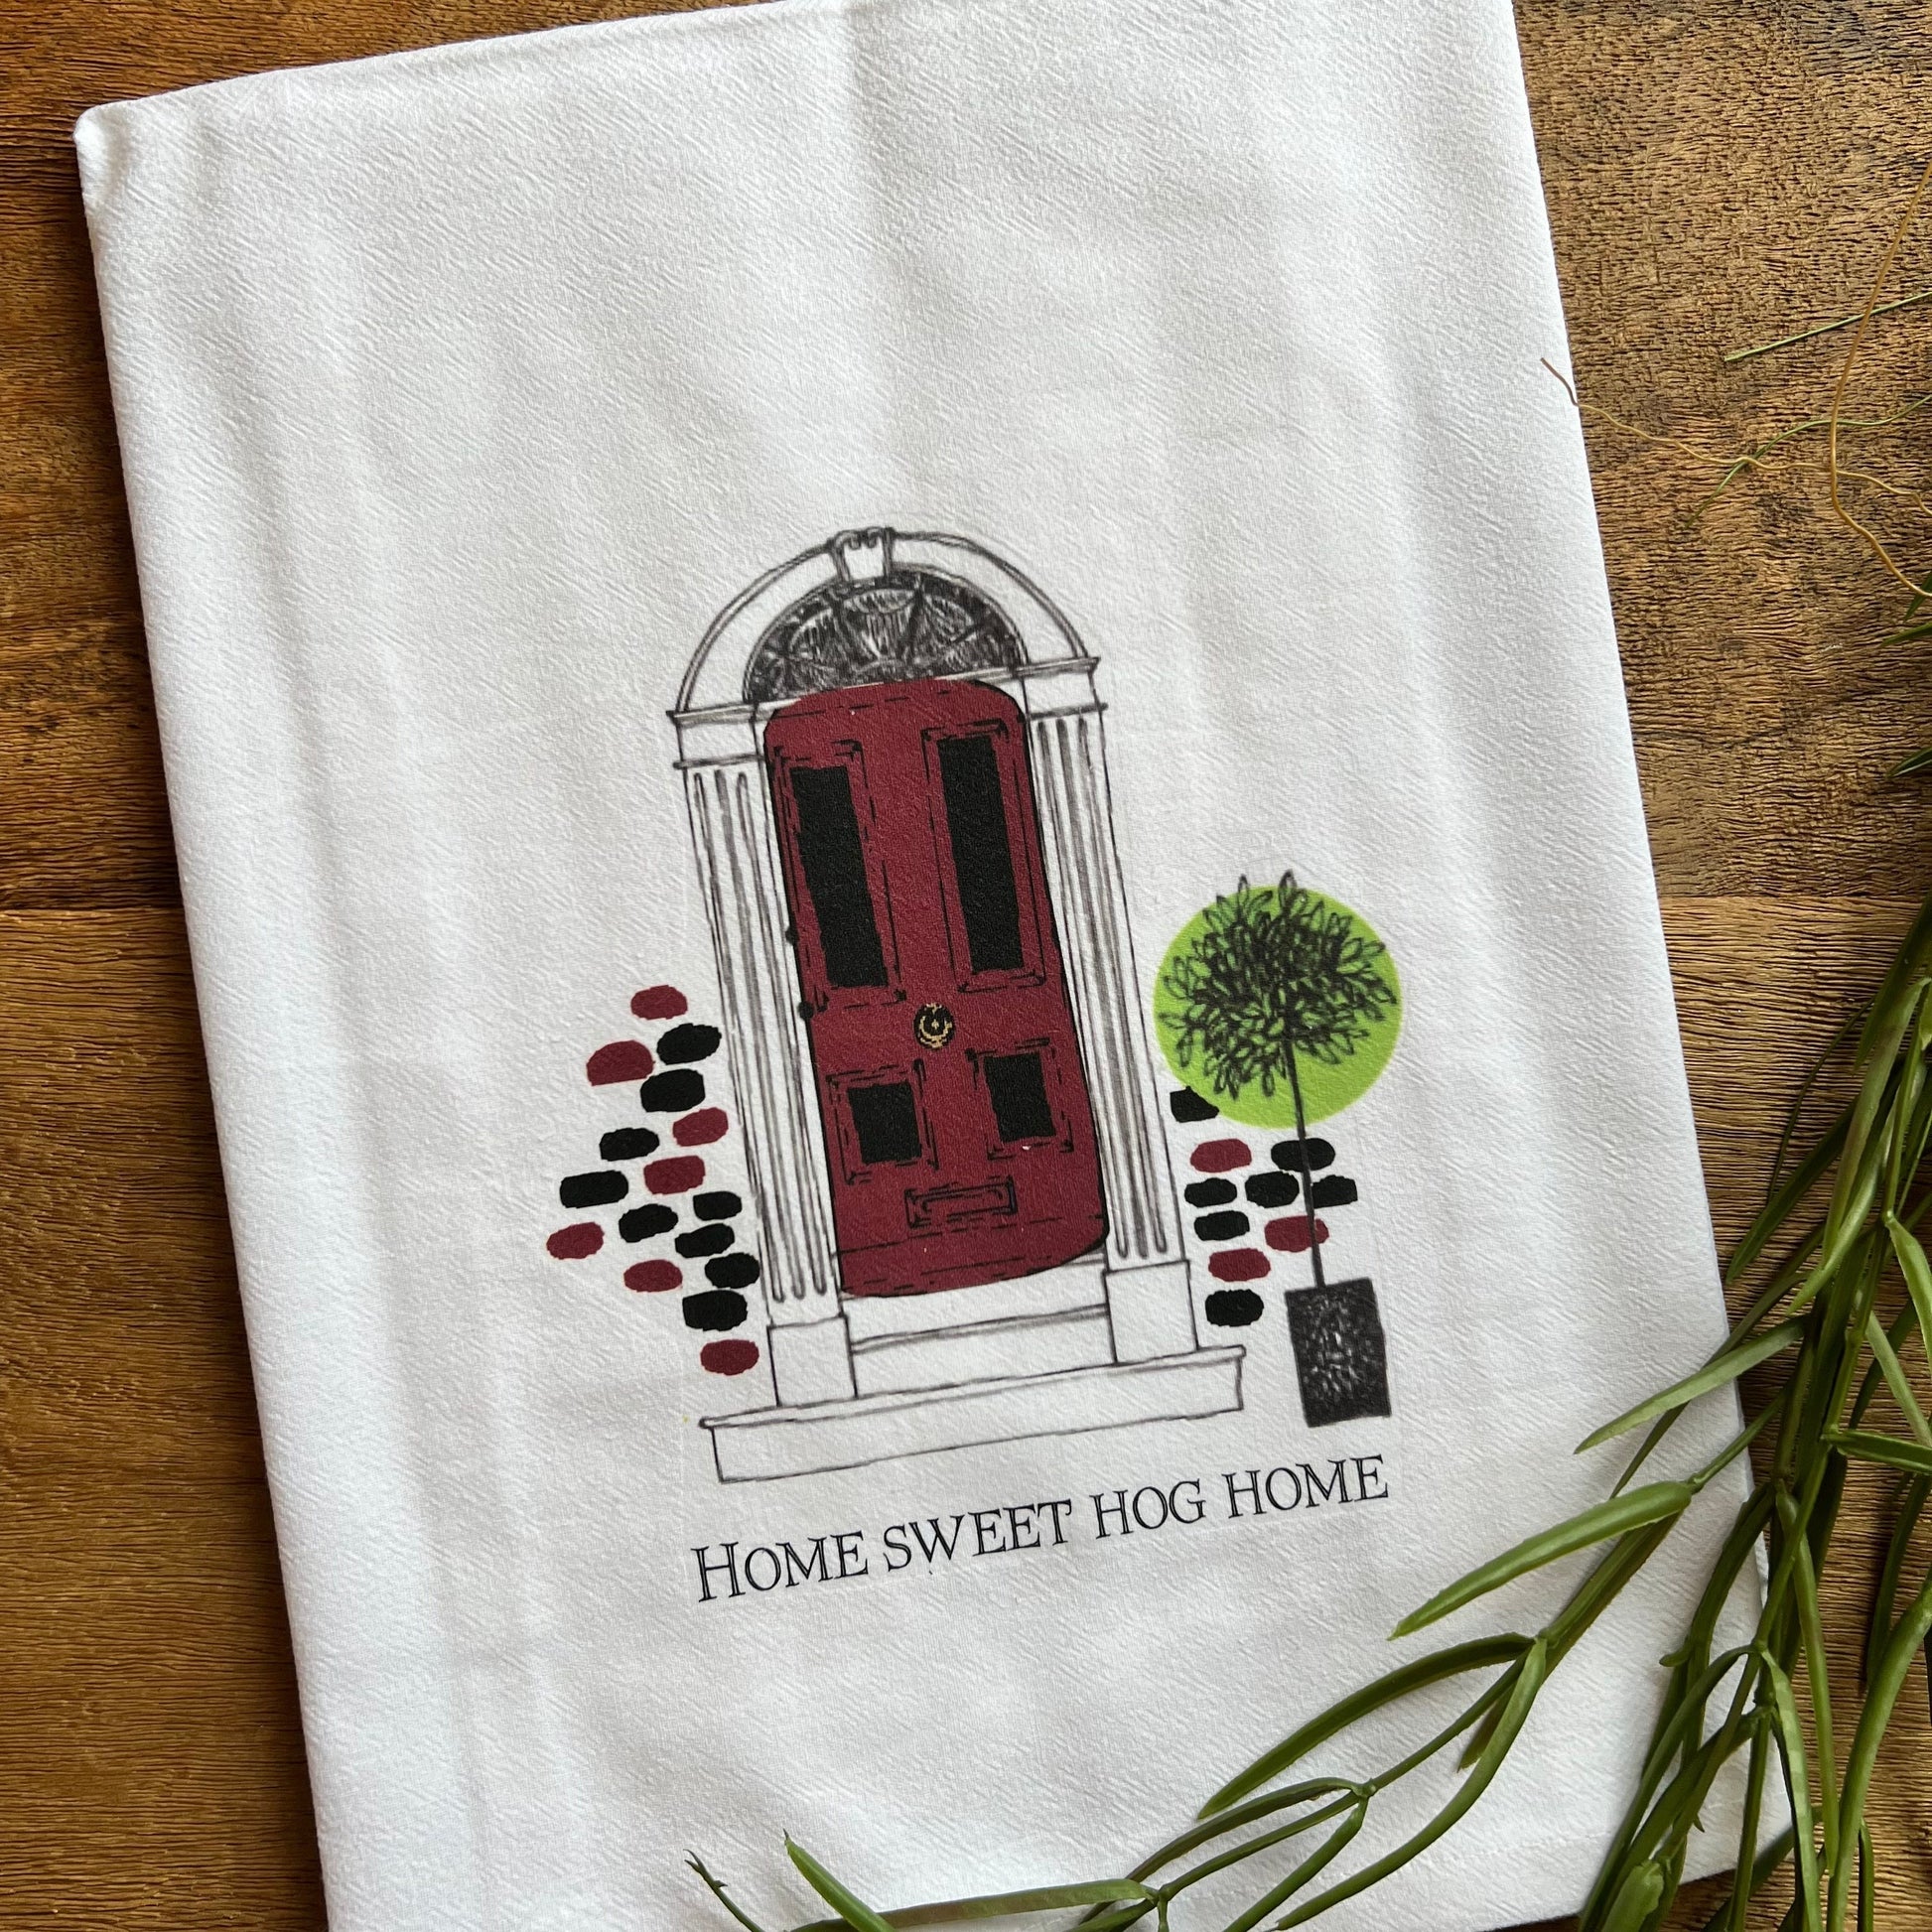 white towel with front door design and text "home sweet hog home" along the bottom.